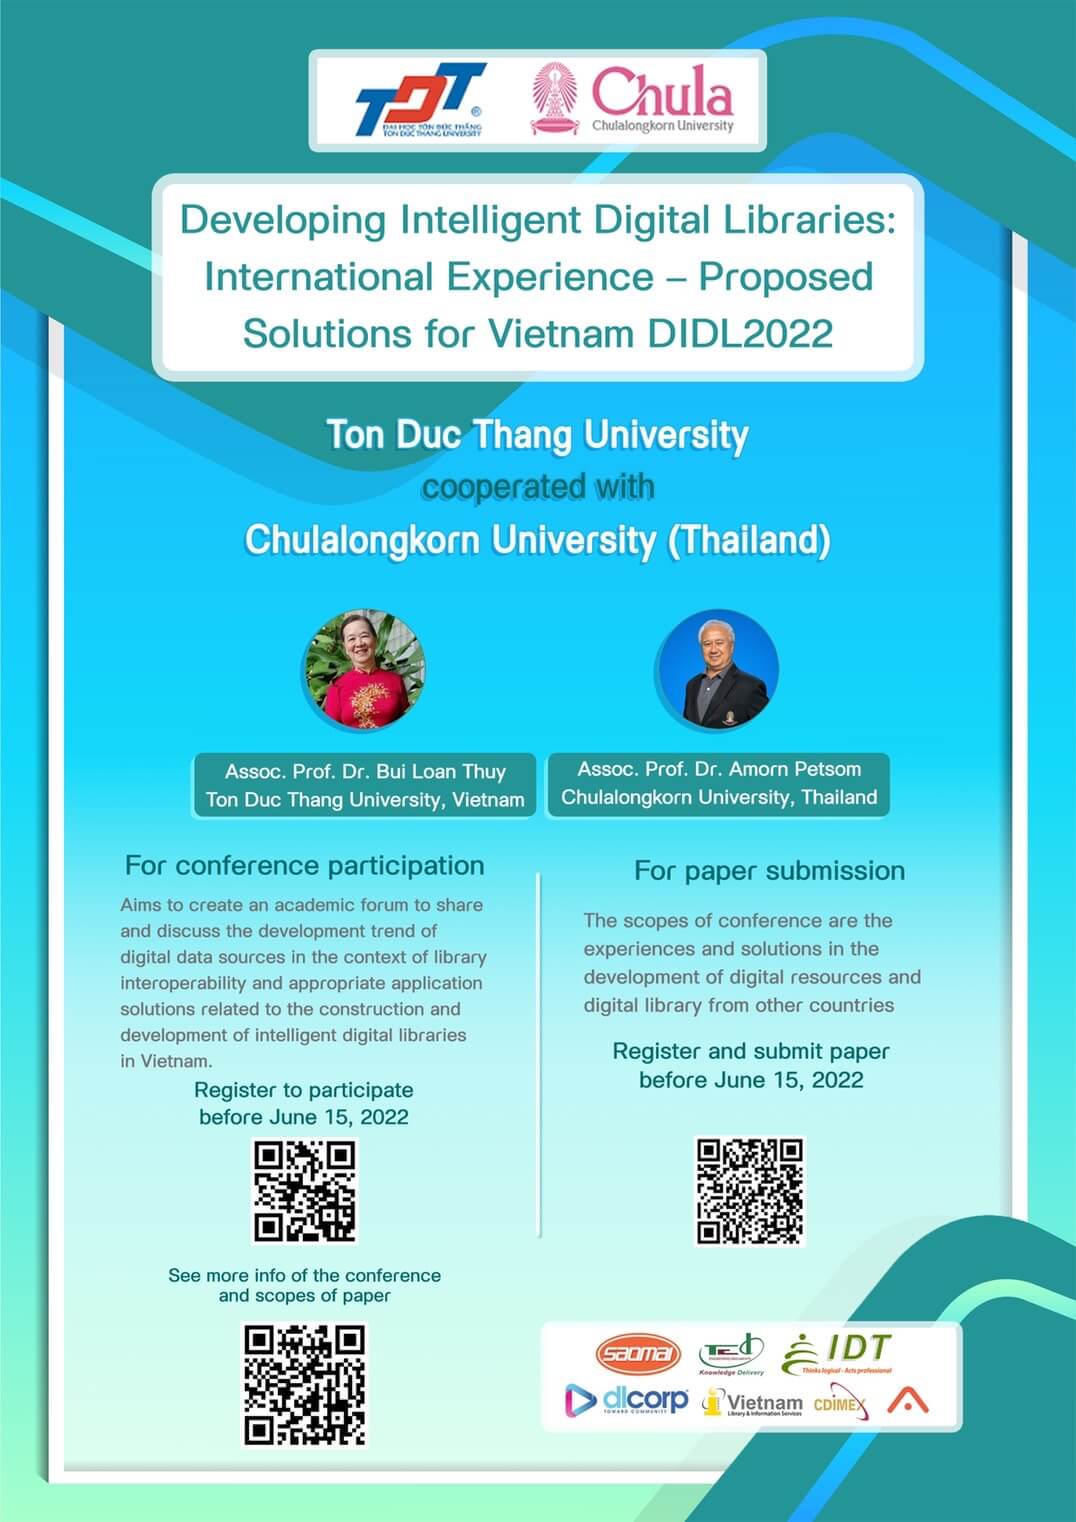 Newswise: Developing Intelligent Digital Libraries: International Experience – Proposed Solutions for Vietnam